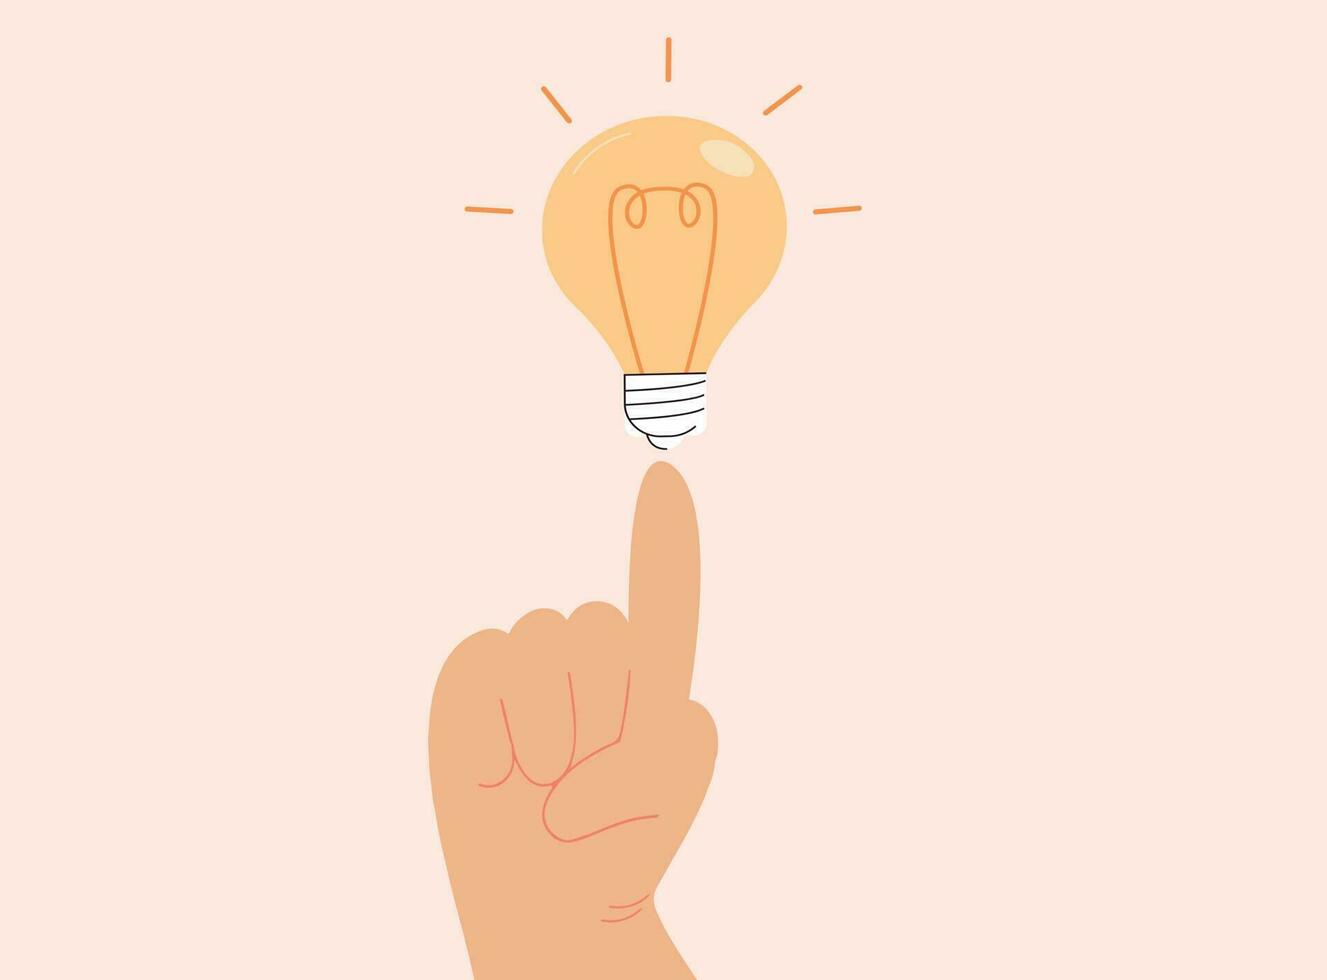 Big human Hand with an electric light bulb lamp. Growing business idea concept. Illustration of creative solutions, thinking and business ideas to make money online. Vector illustration